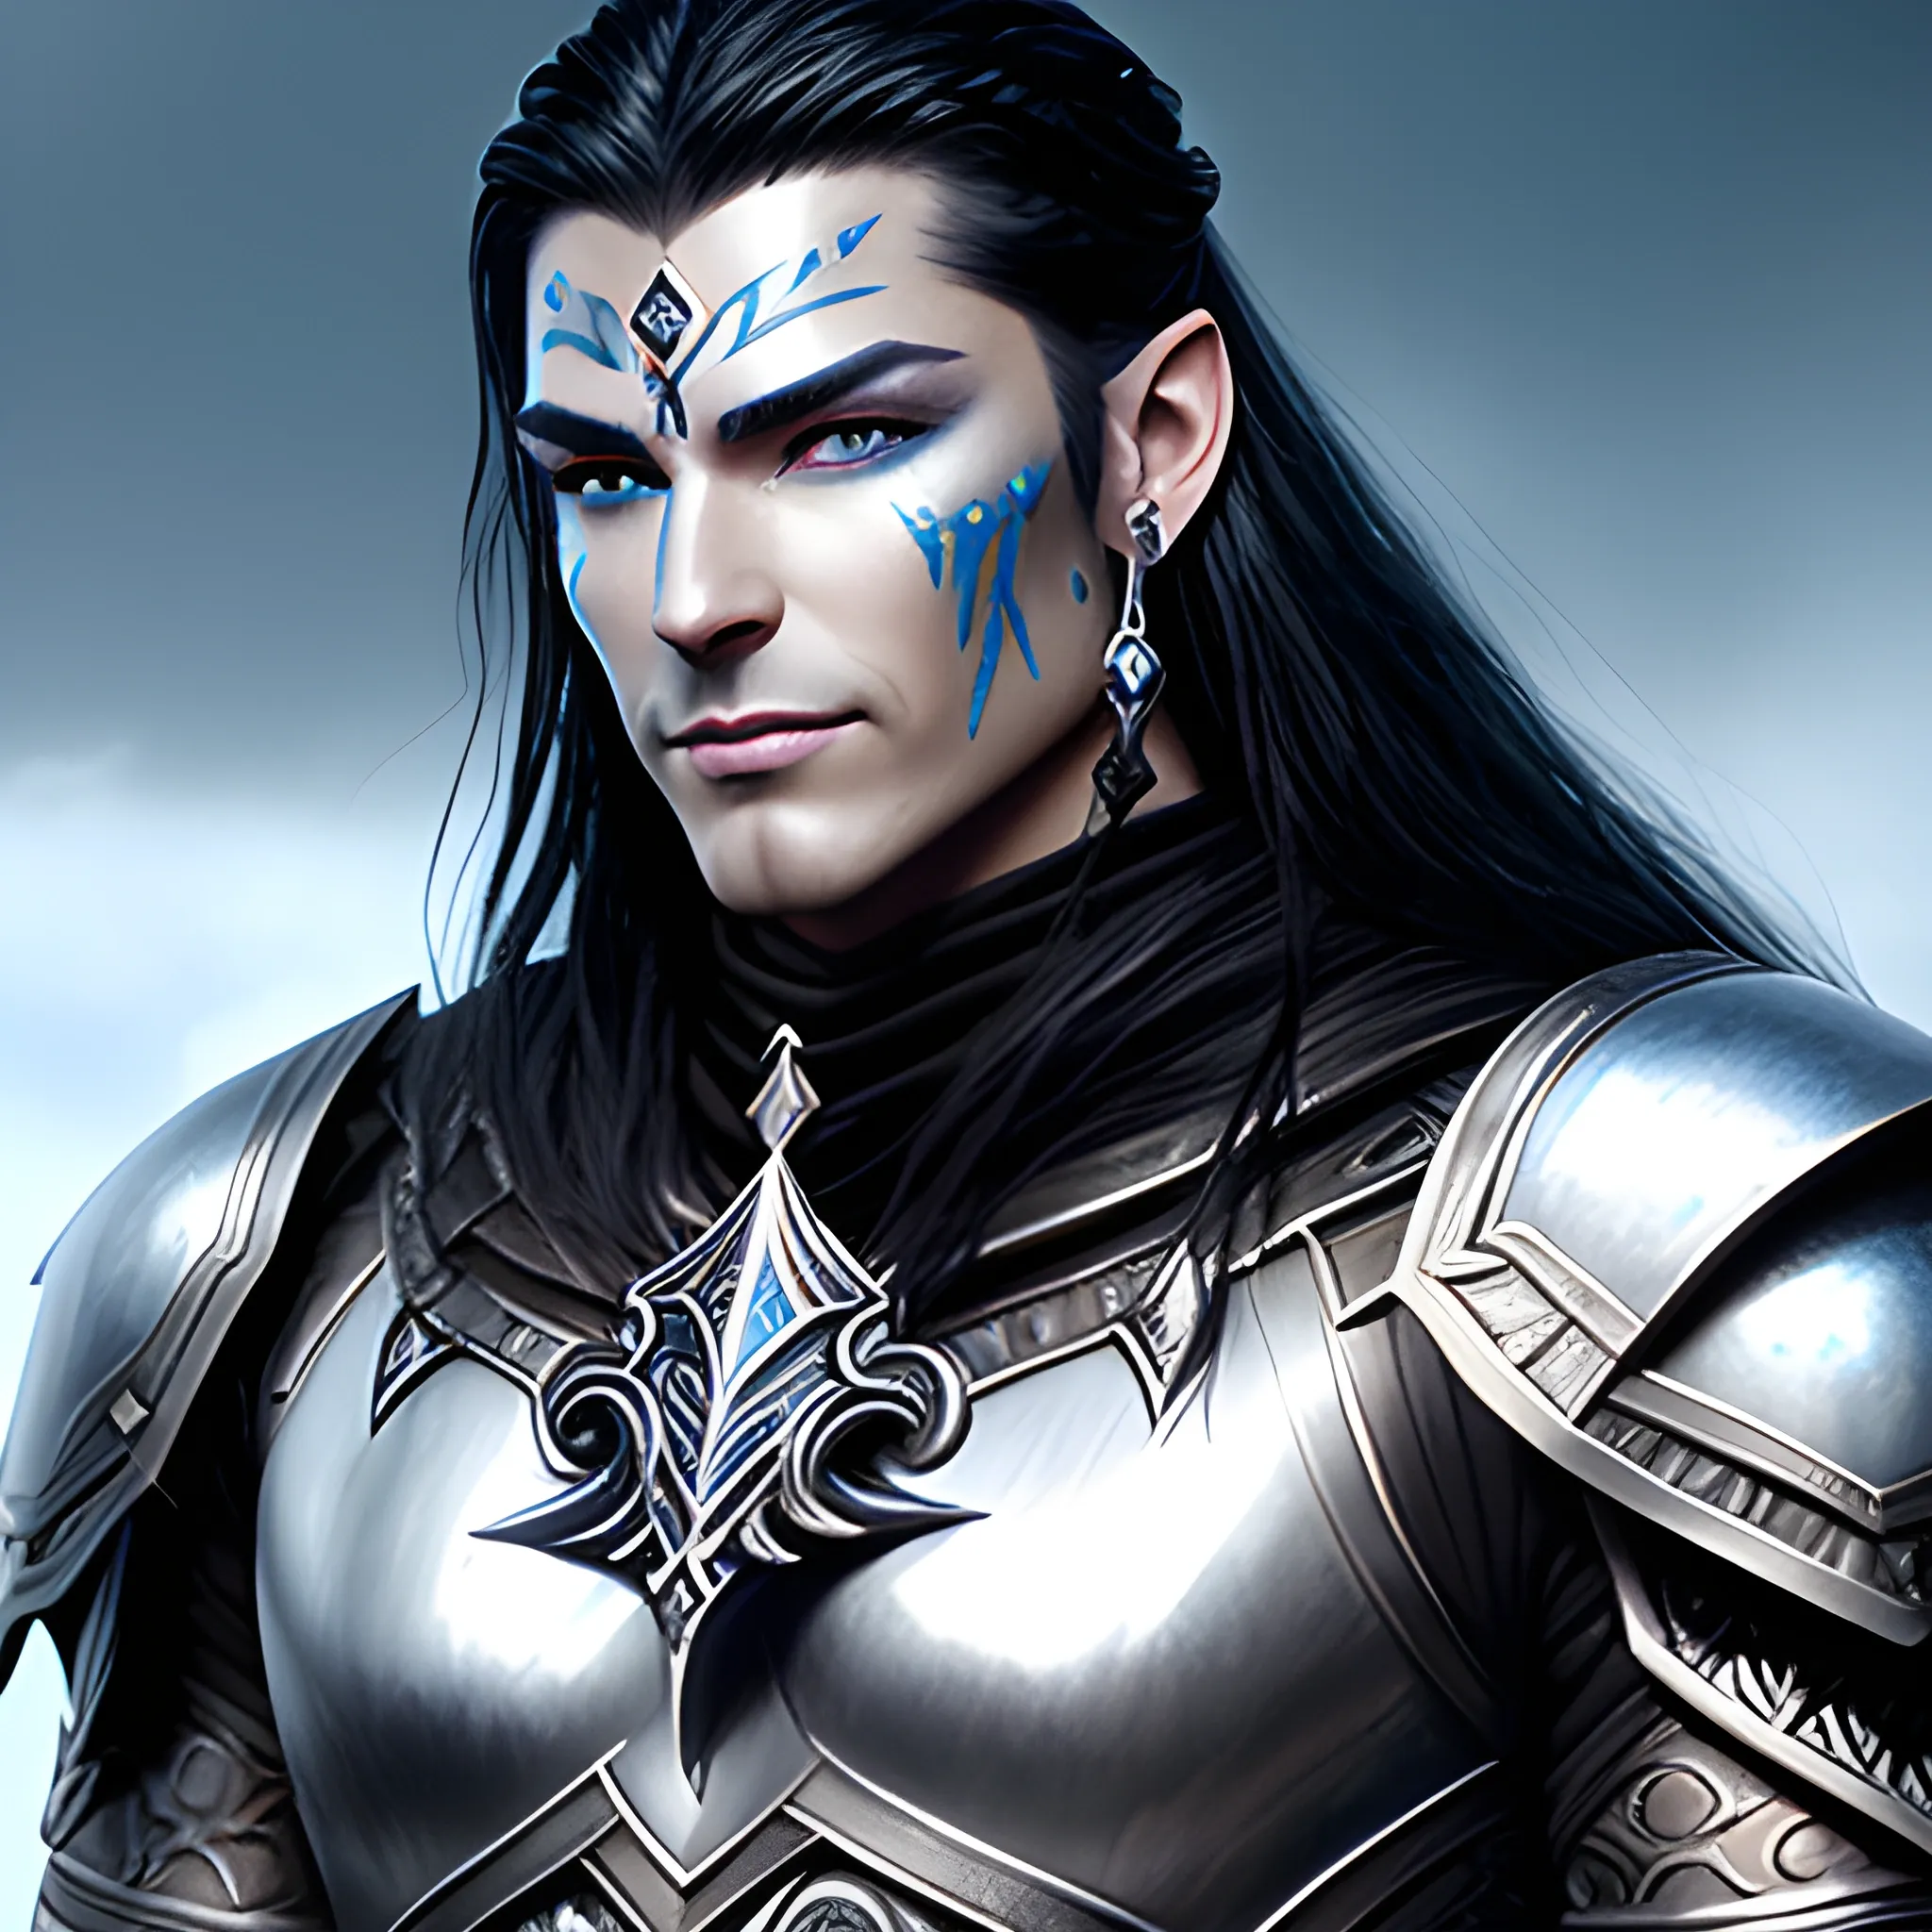 fantasy, paladin, warrior, metal skin, male, long black hair, icy eyes, blue eyes, intricate light silver armor, smiling, hyper realistic, 3D, dungeons and dragons, elegant, mysterious, strong, armed, black hair, Oil Painting, filigree skin, silver skin, silver flame necklace, grey skin, iron skin, platinum skin, human ears, Oil Painting, young, handsome, thin tribal facial tattoos, steel eyes, face tattoo, polynesian